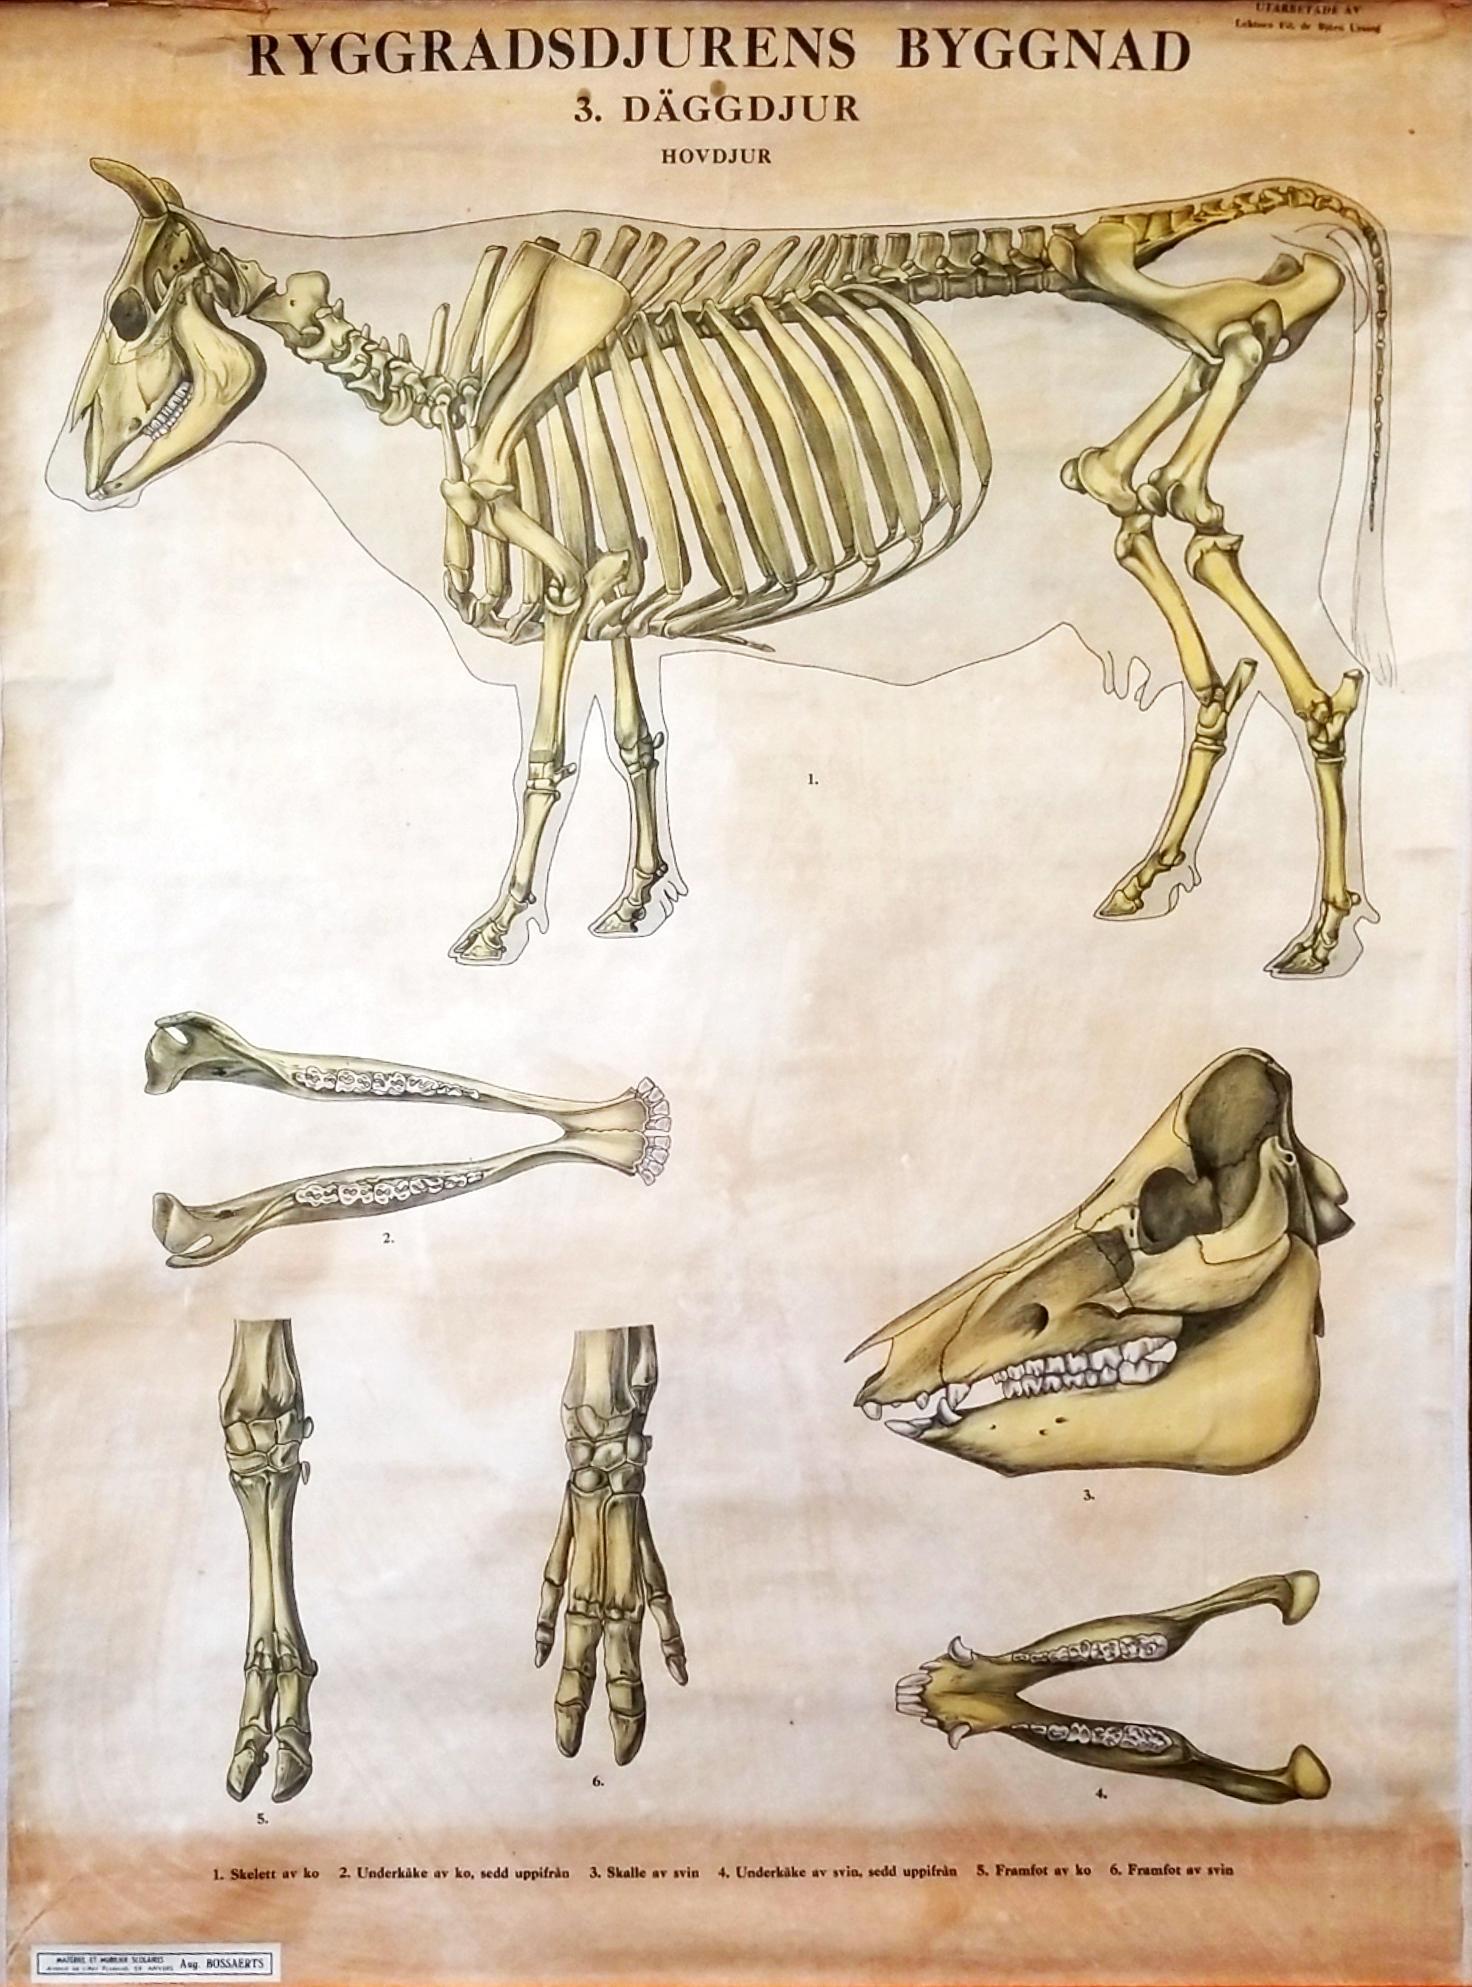 1930s Swedish school poster displaying the anatomy of a bovine steer. This can be seen at our 302 Bowery location in Manhattan.